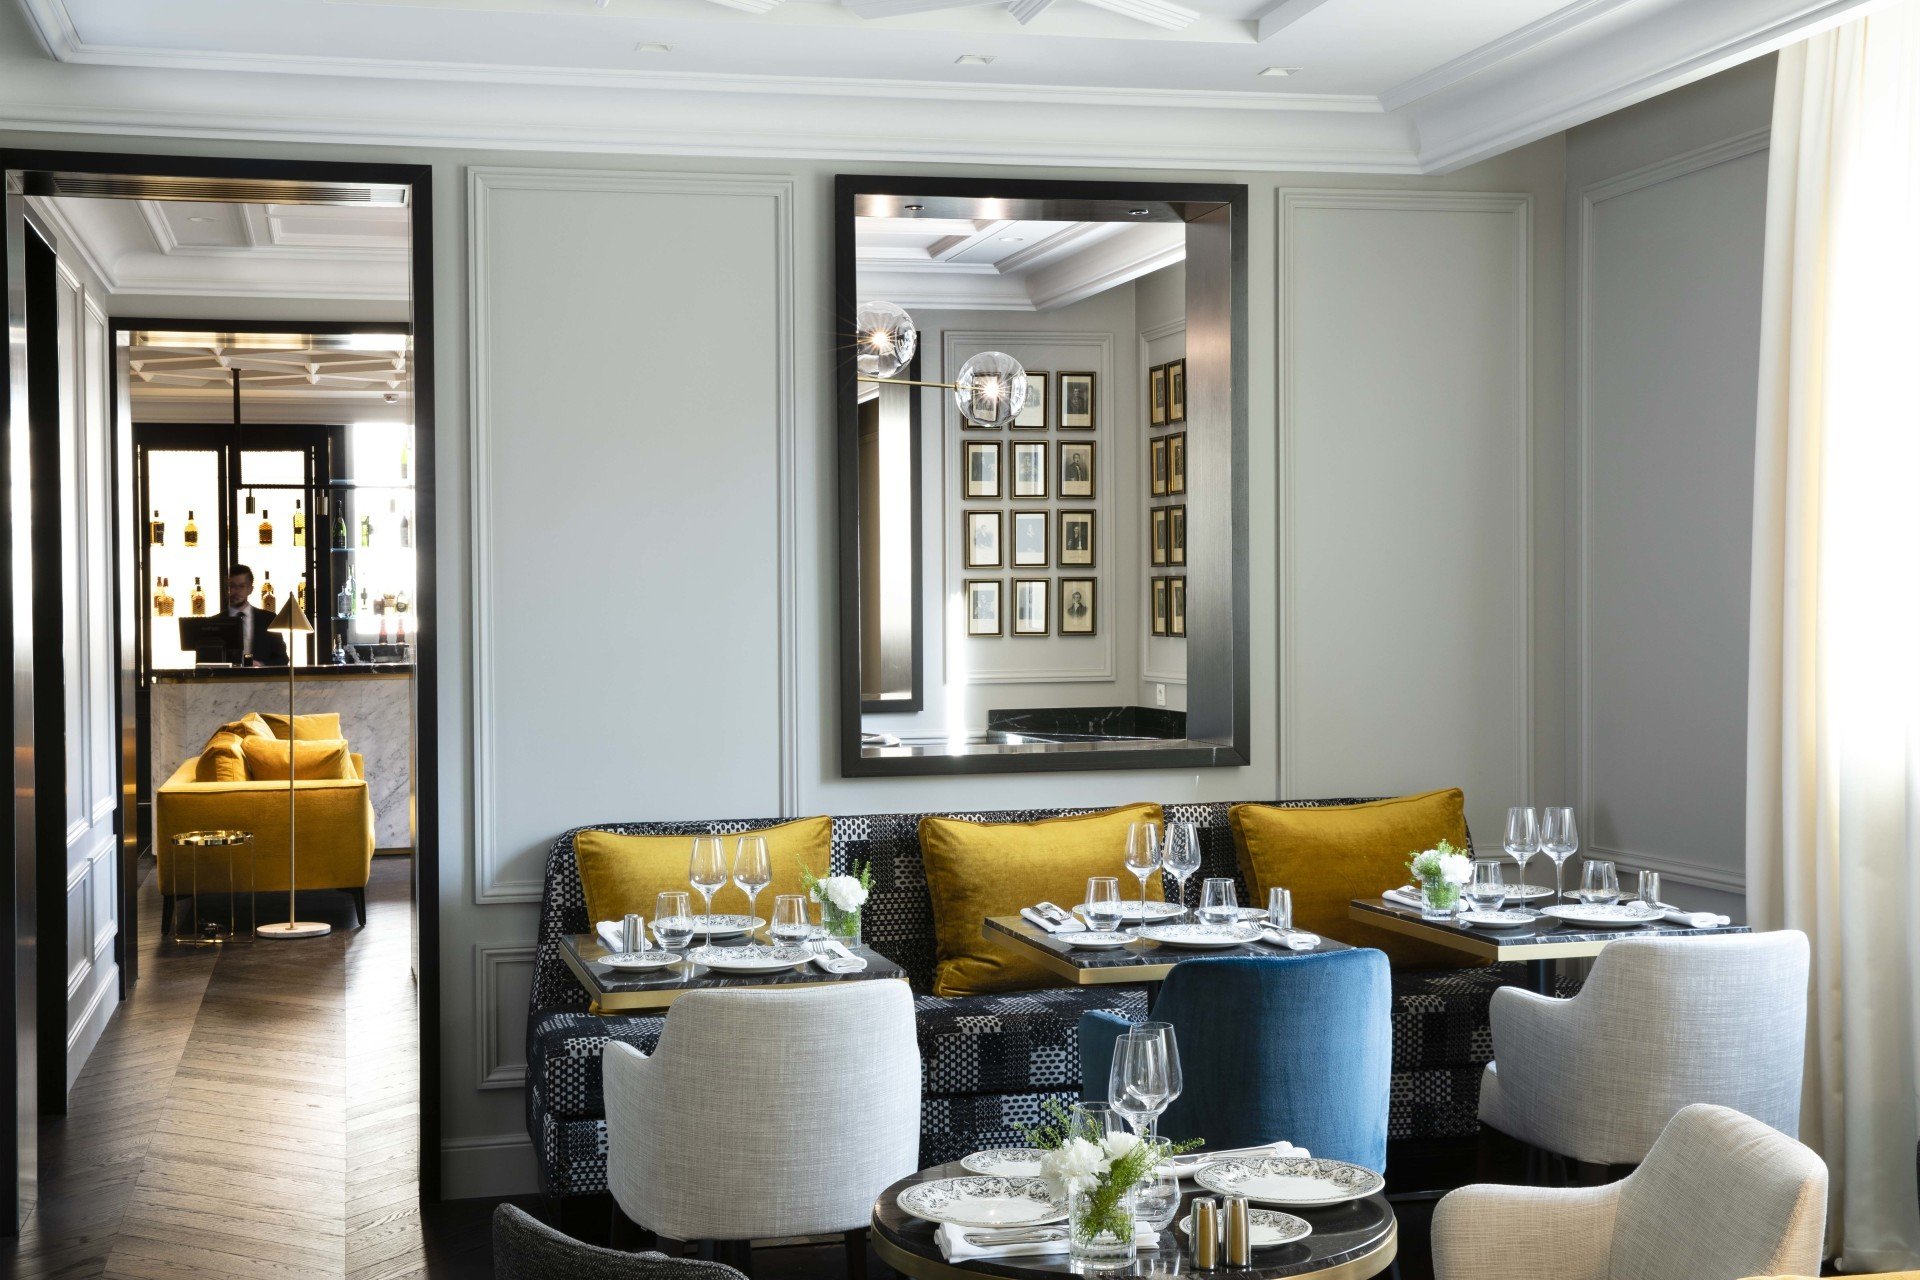 Restaurant Hotel Le Damantin in Paris designed by the french interior design studio jean-philippe nuel, chic atmosphere and luxurious decoration